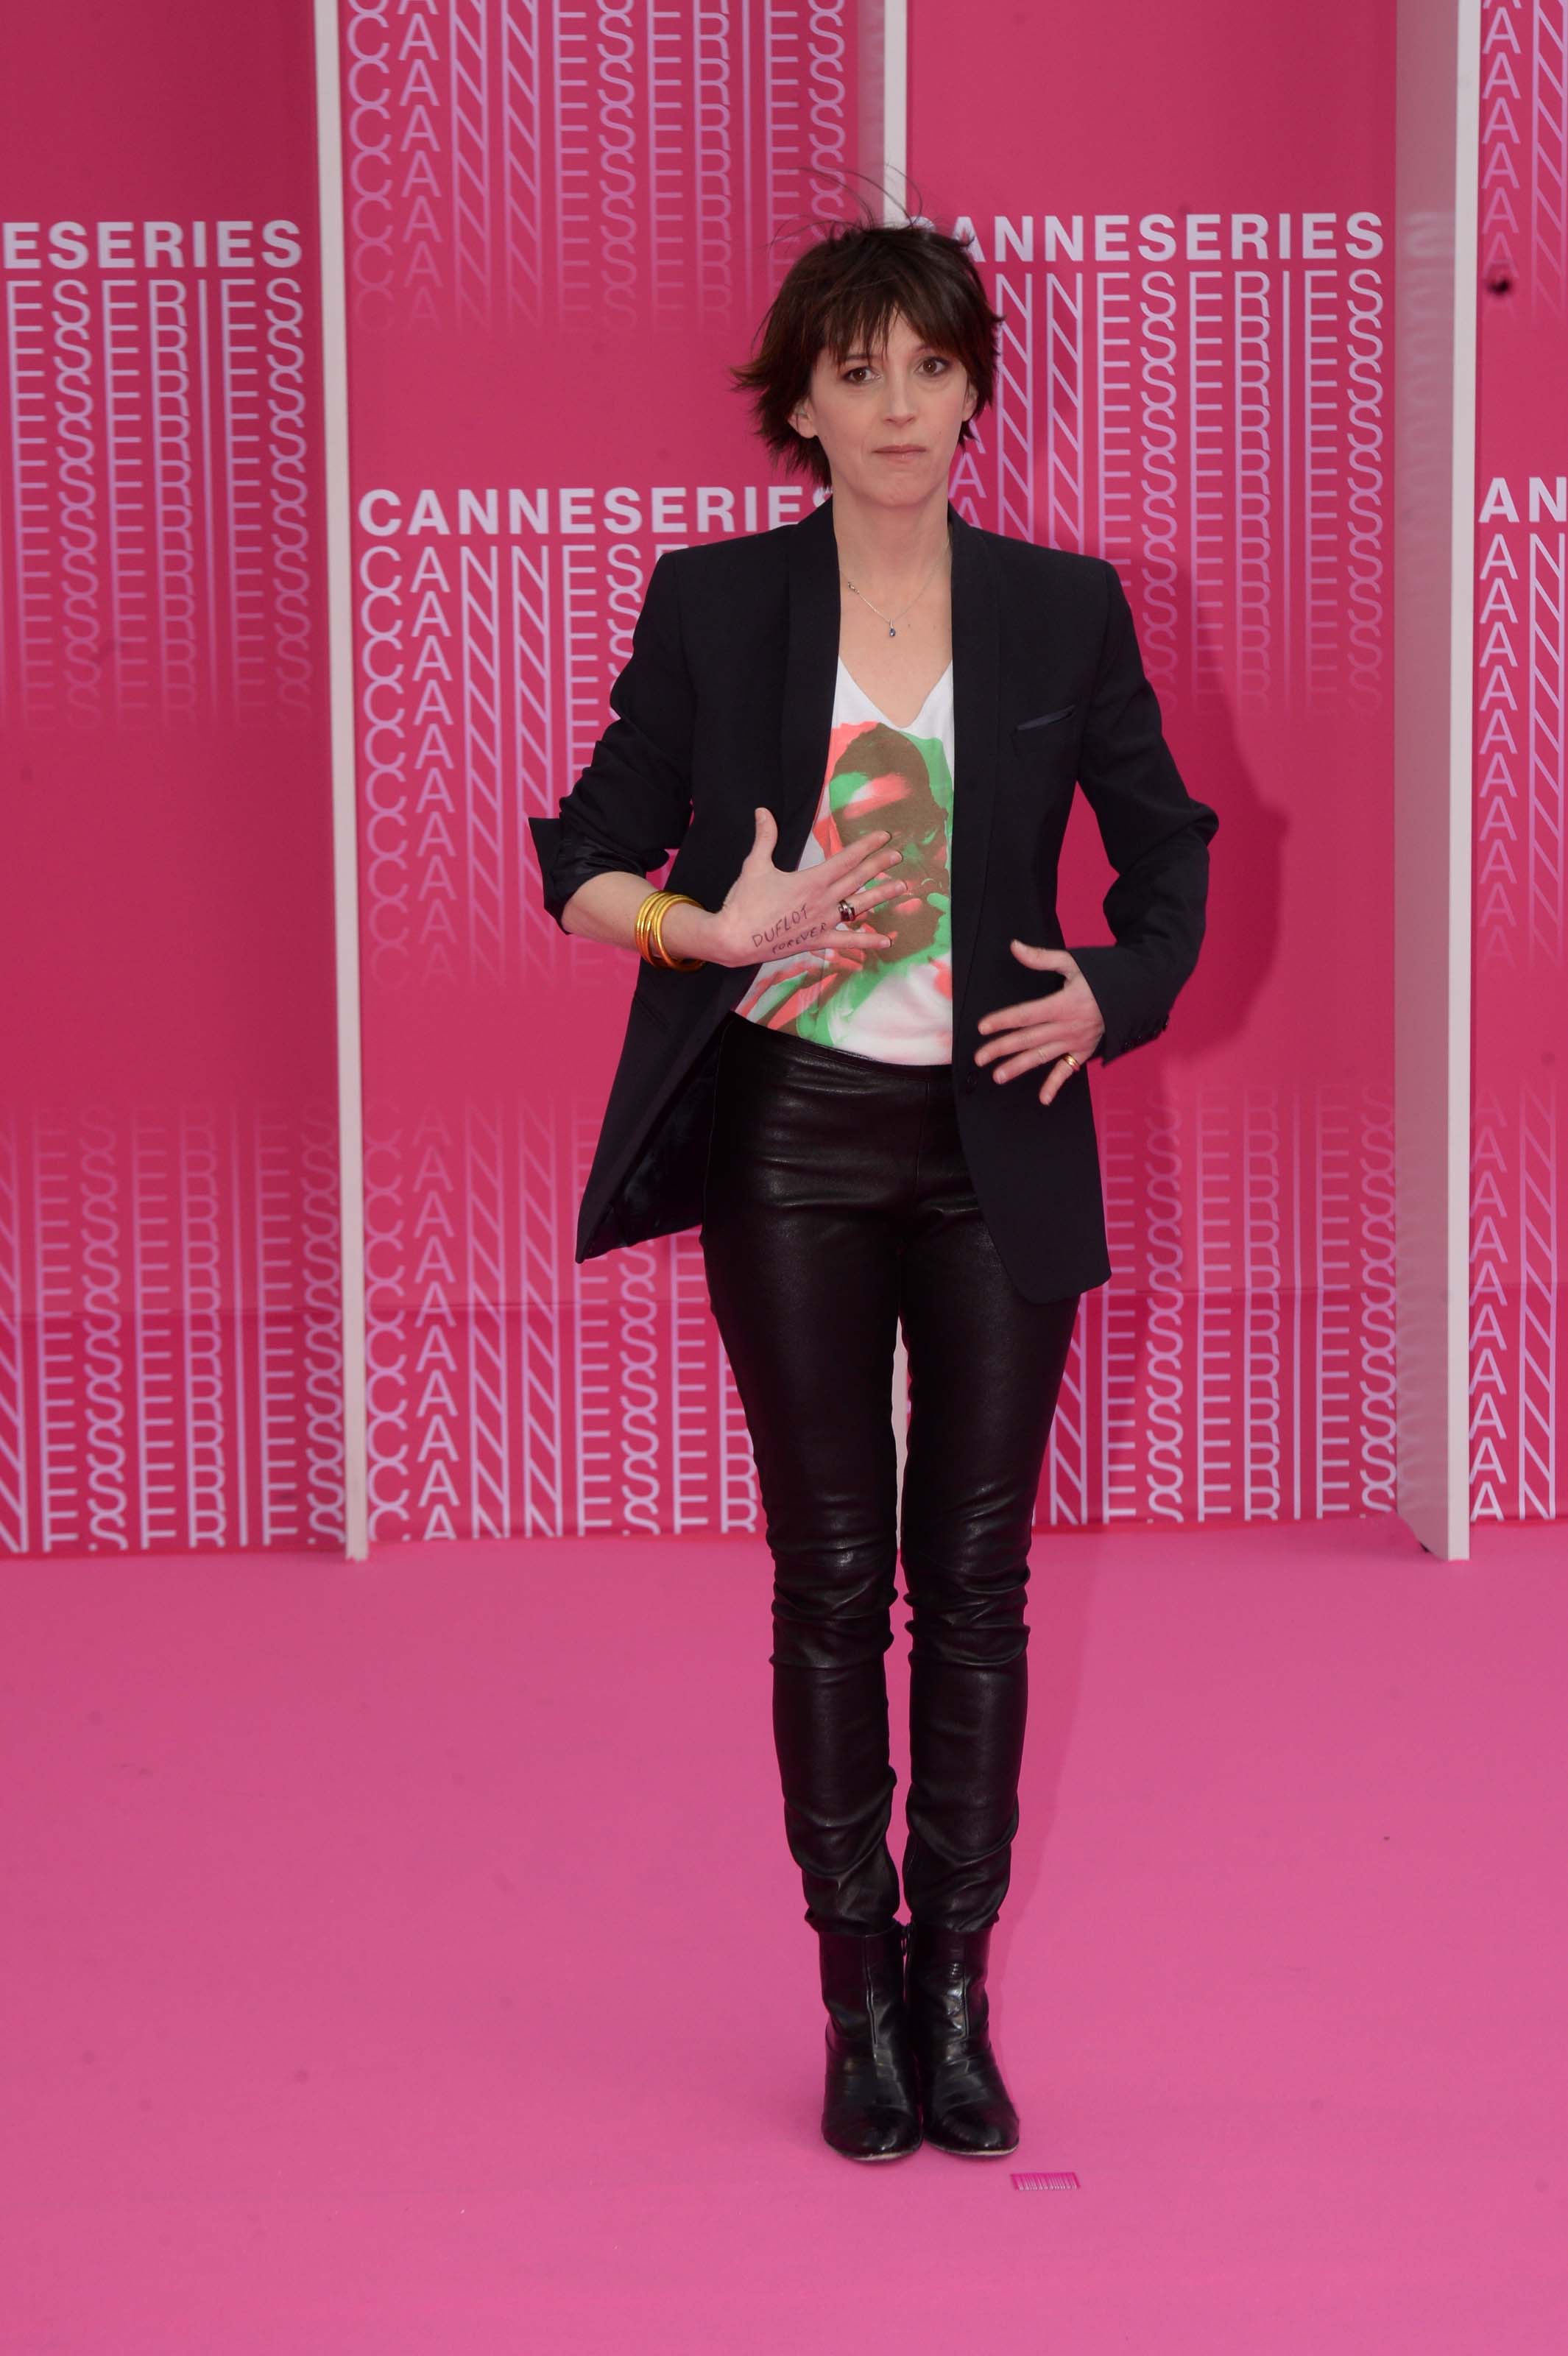 Florence Loiret Caille attends 2018 CanneSeries Opening Competition Gala Night